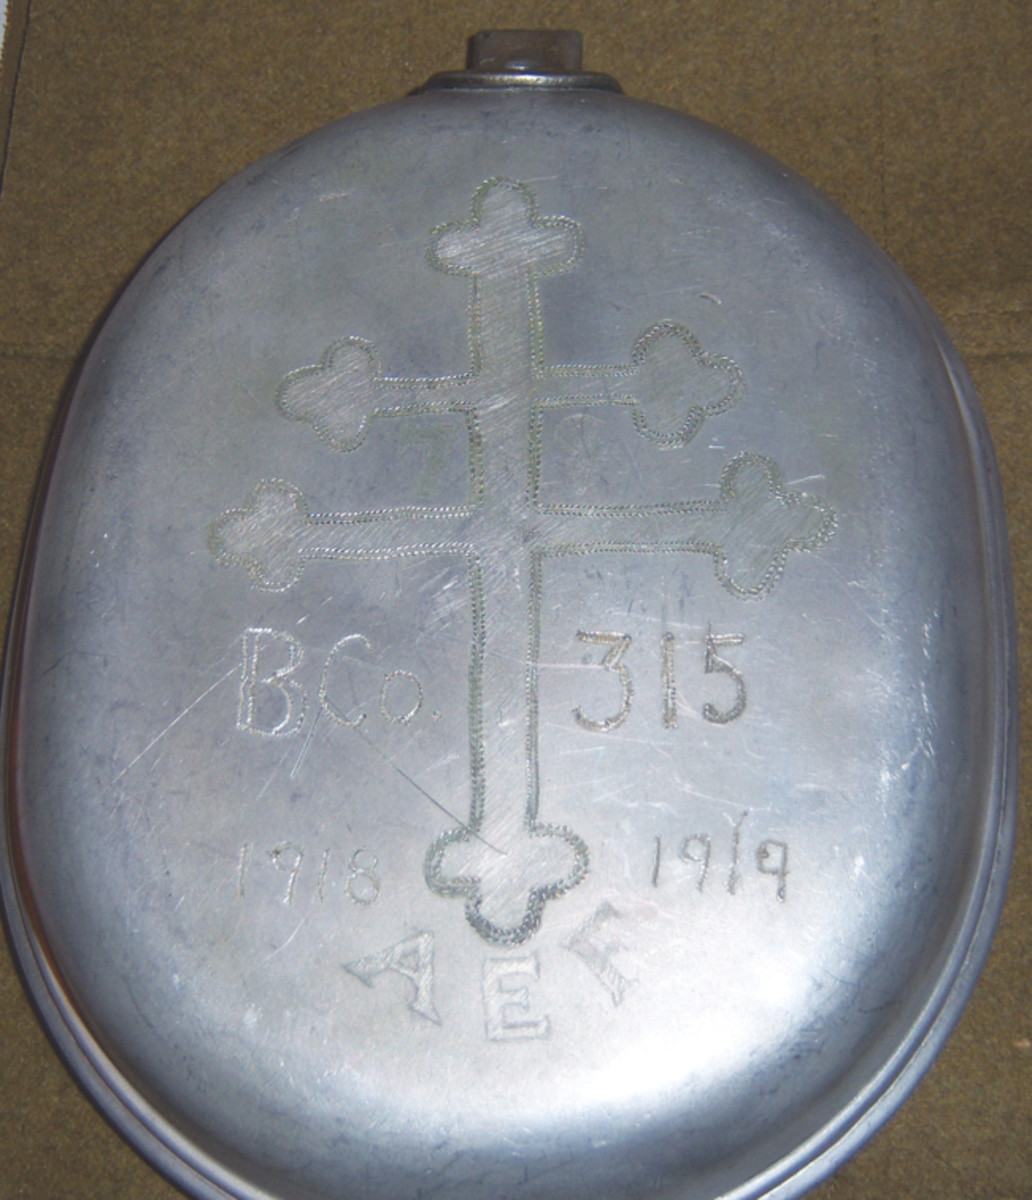  A nicely carved mess kit belonging to a soldier from Company B, 315th Infantry Regiment, 79th Division.